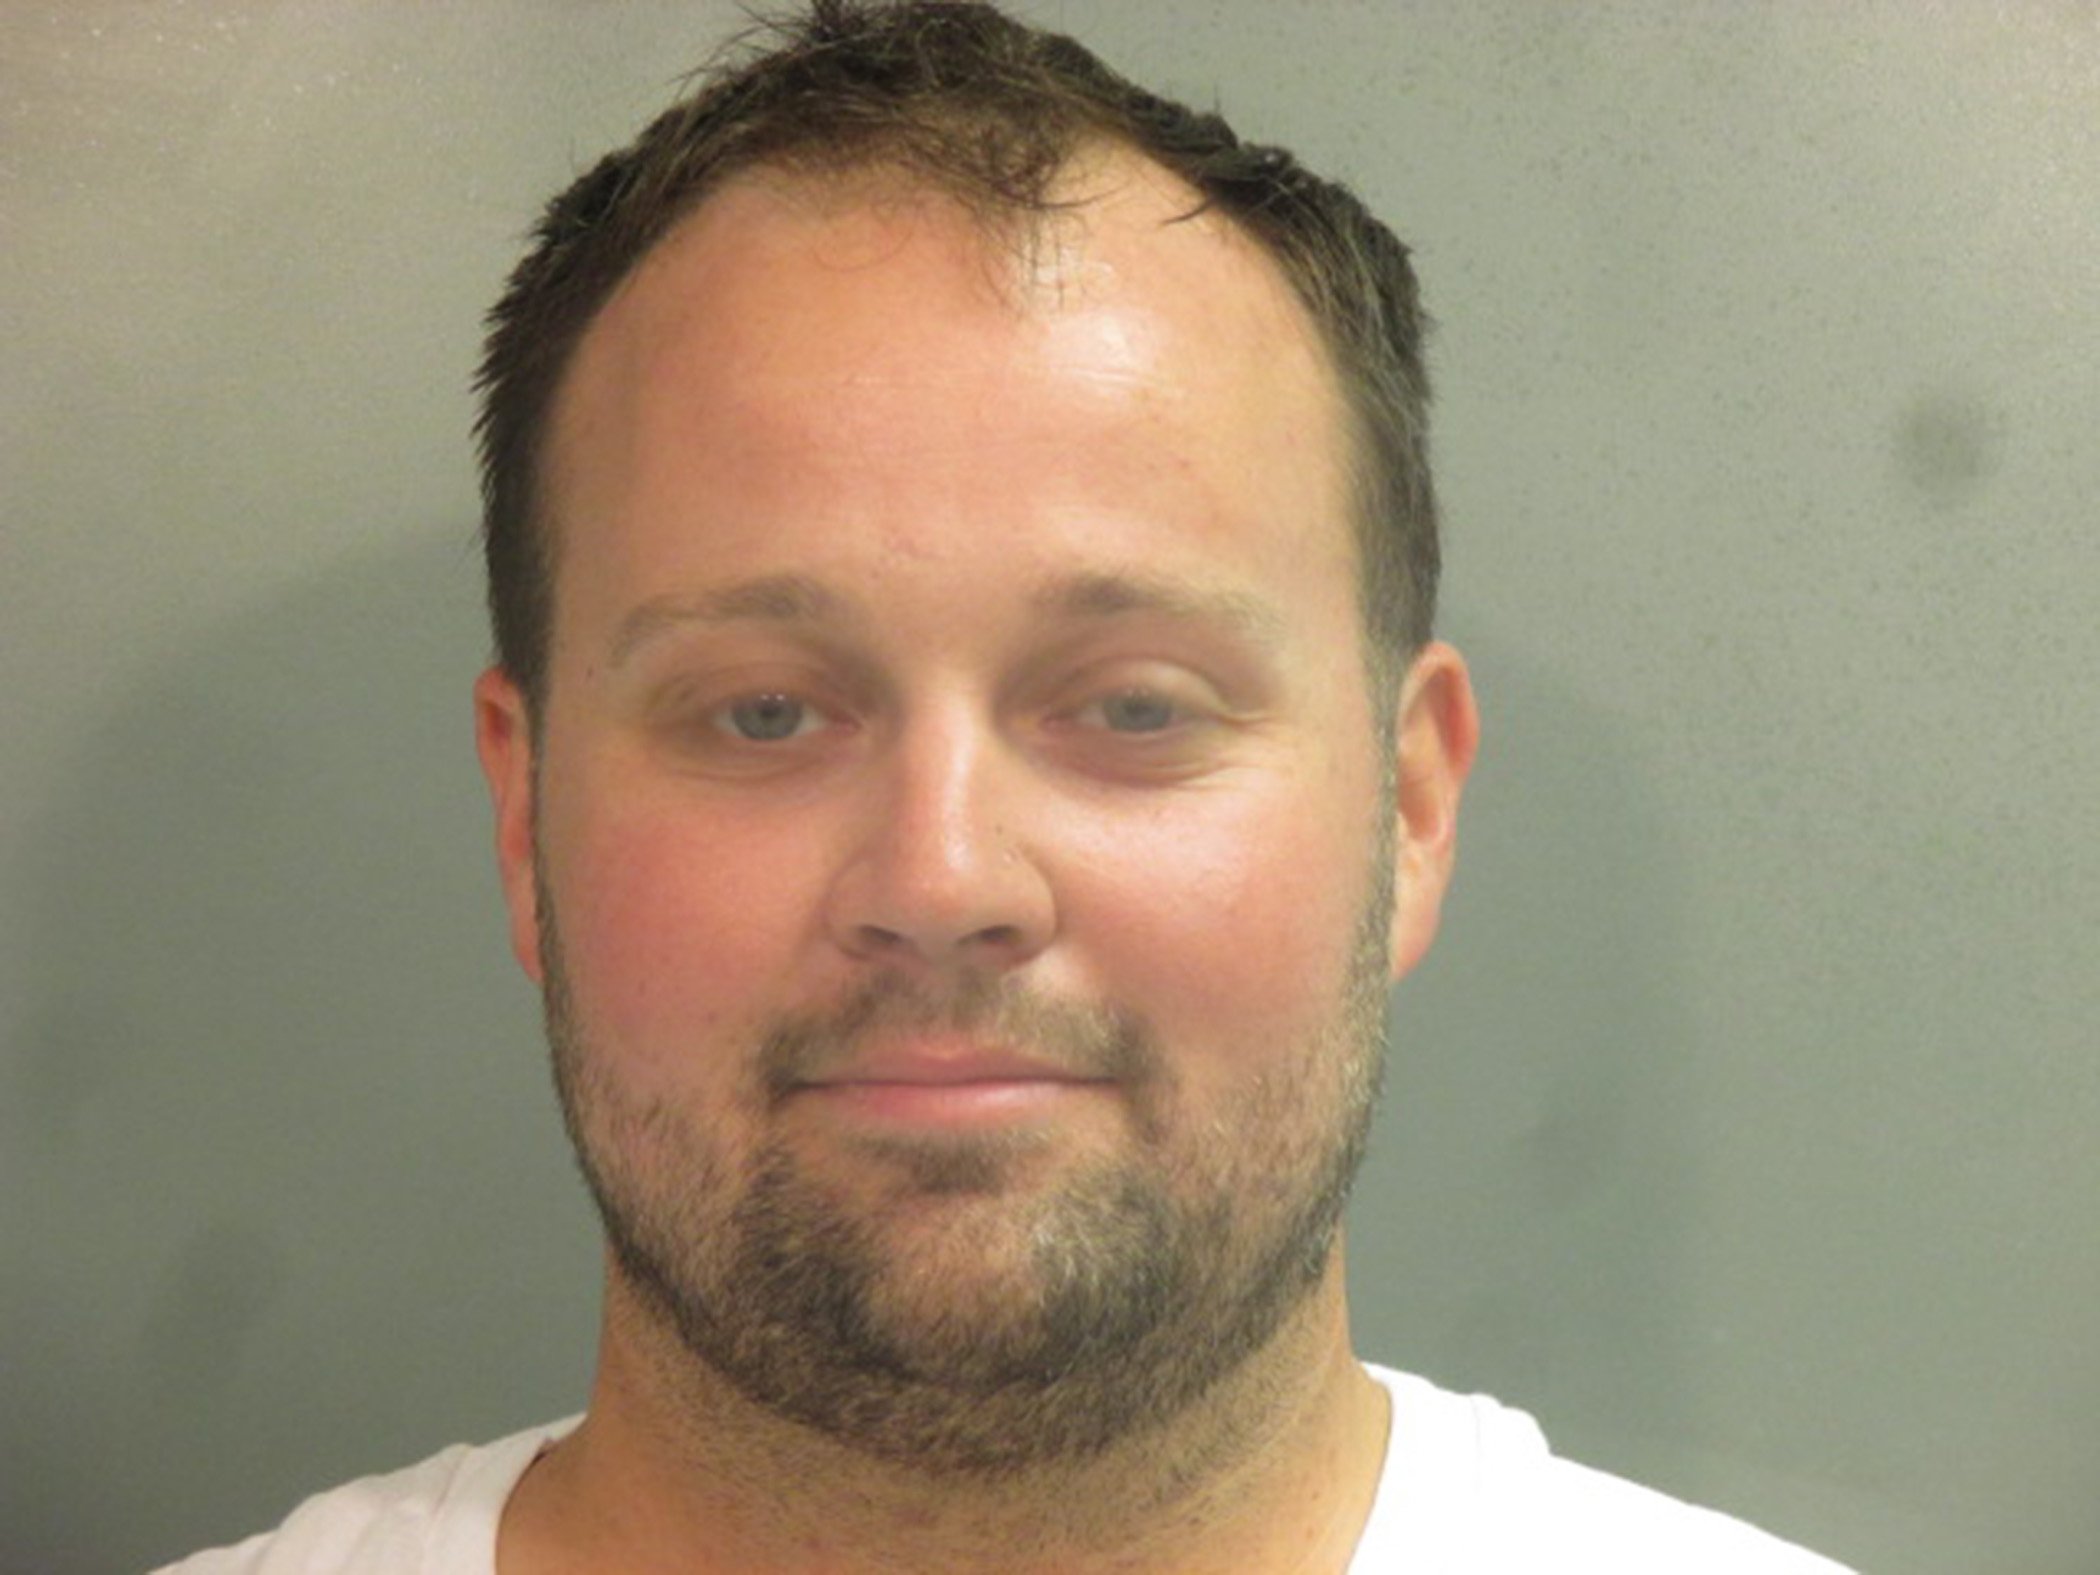 Photo of Josh Duggar when he was arrested in April 2021